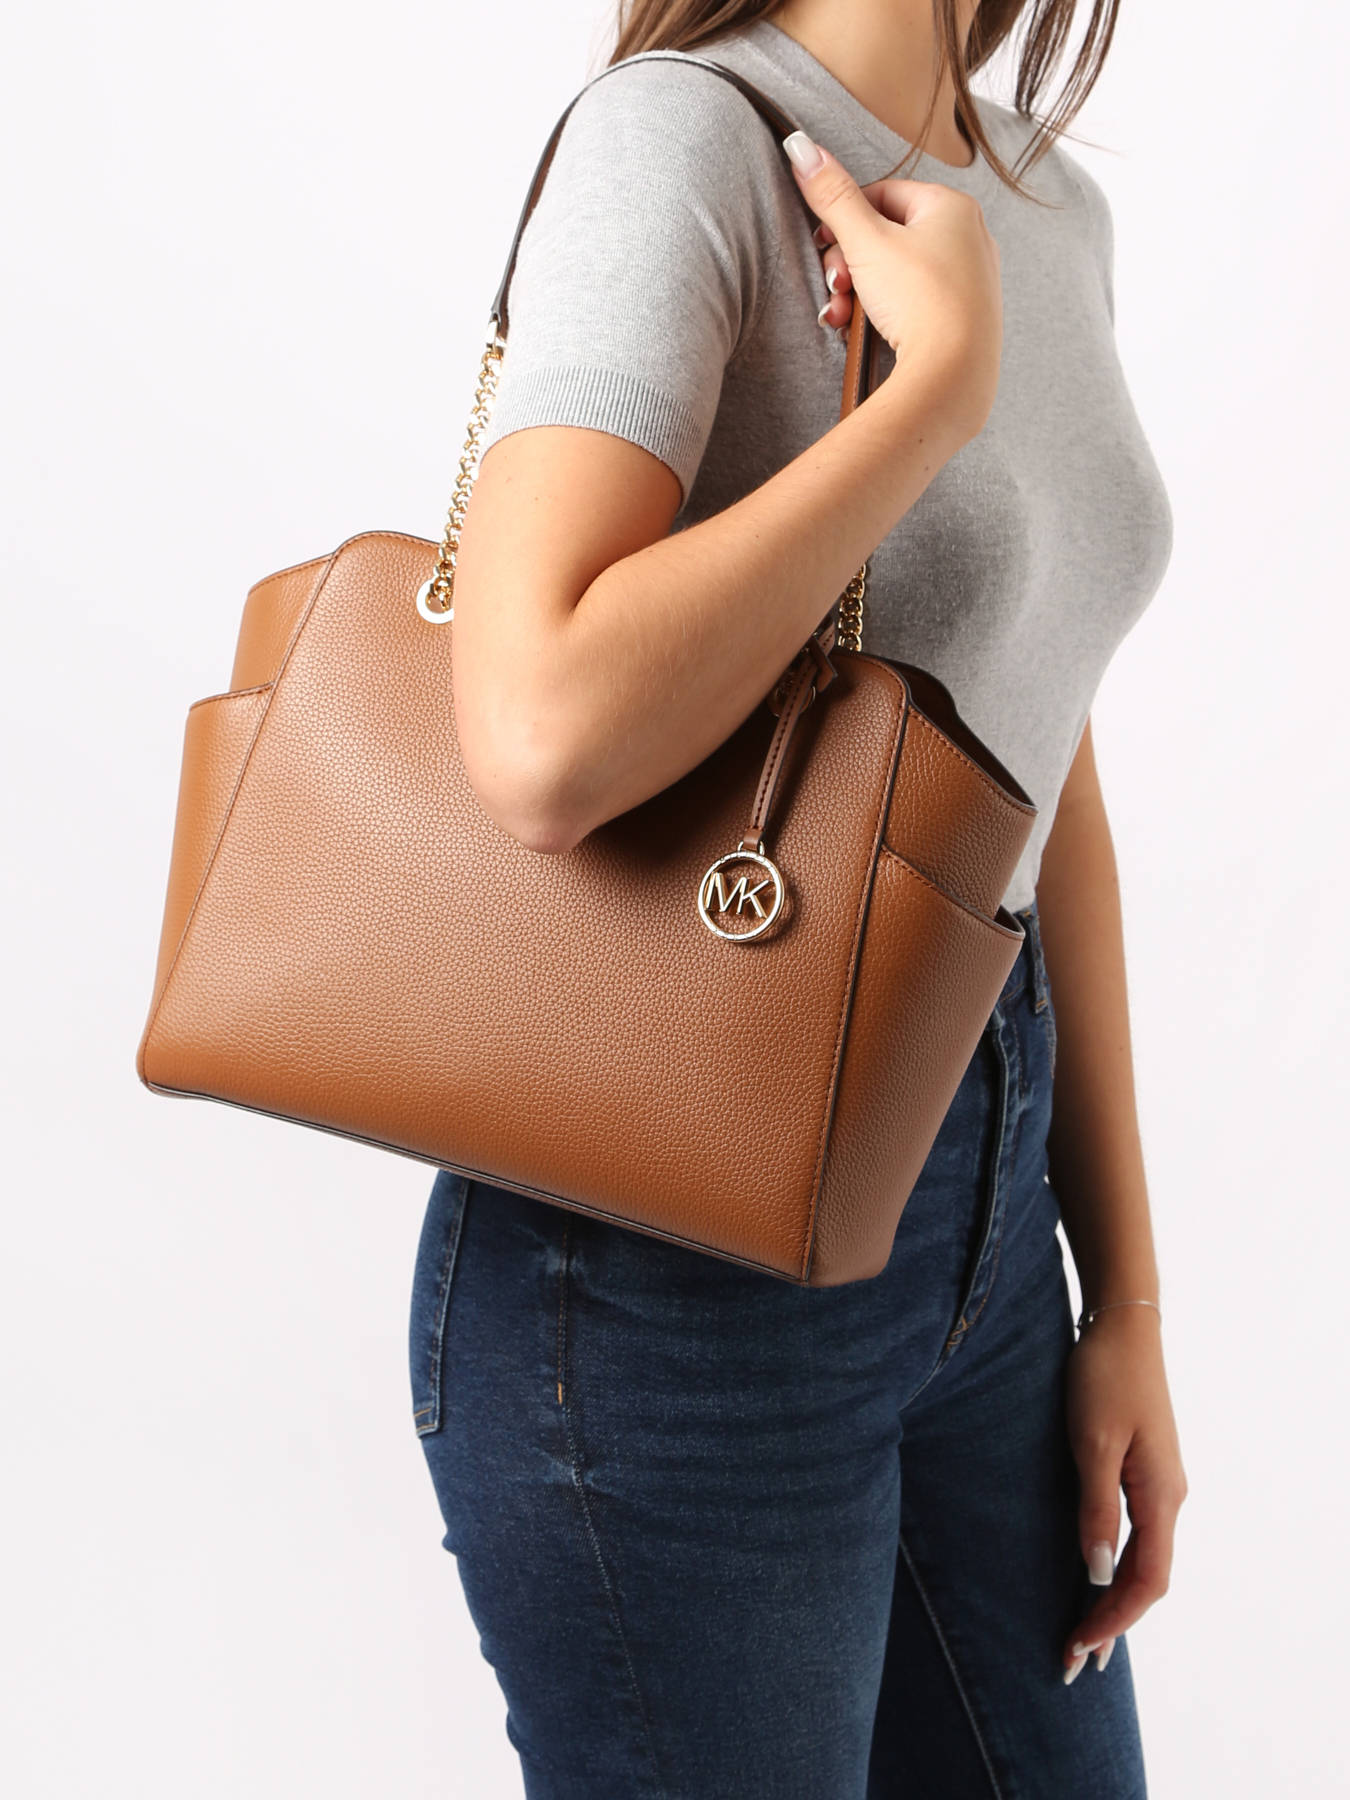 Michael Kors Sady Brown Saffiano Leather Large Tote | The Luxchange India